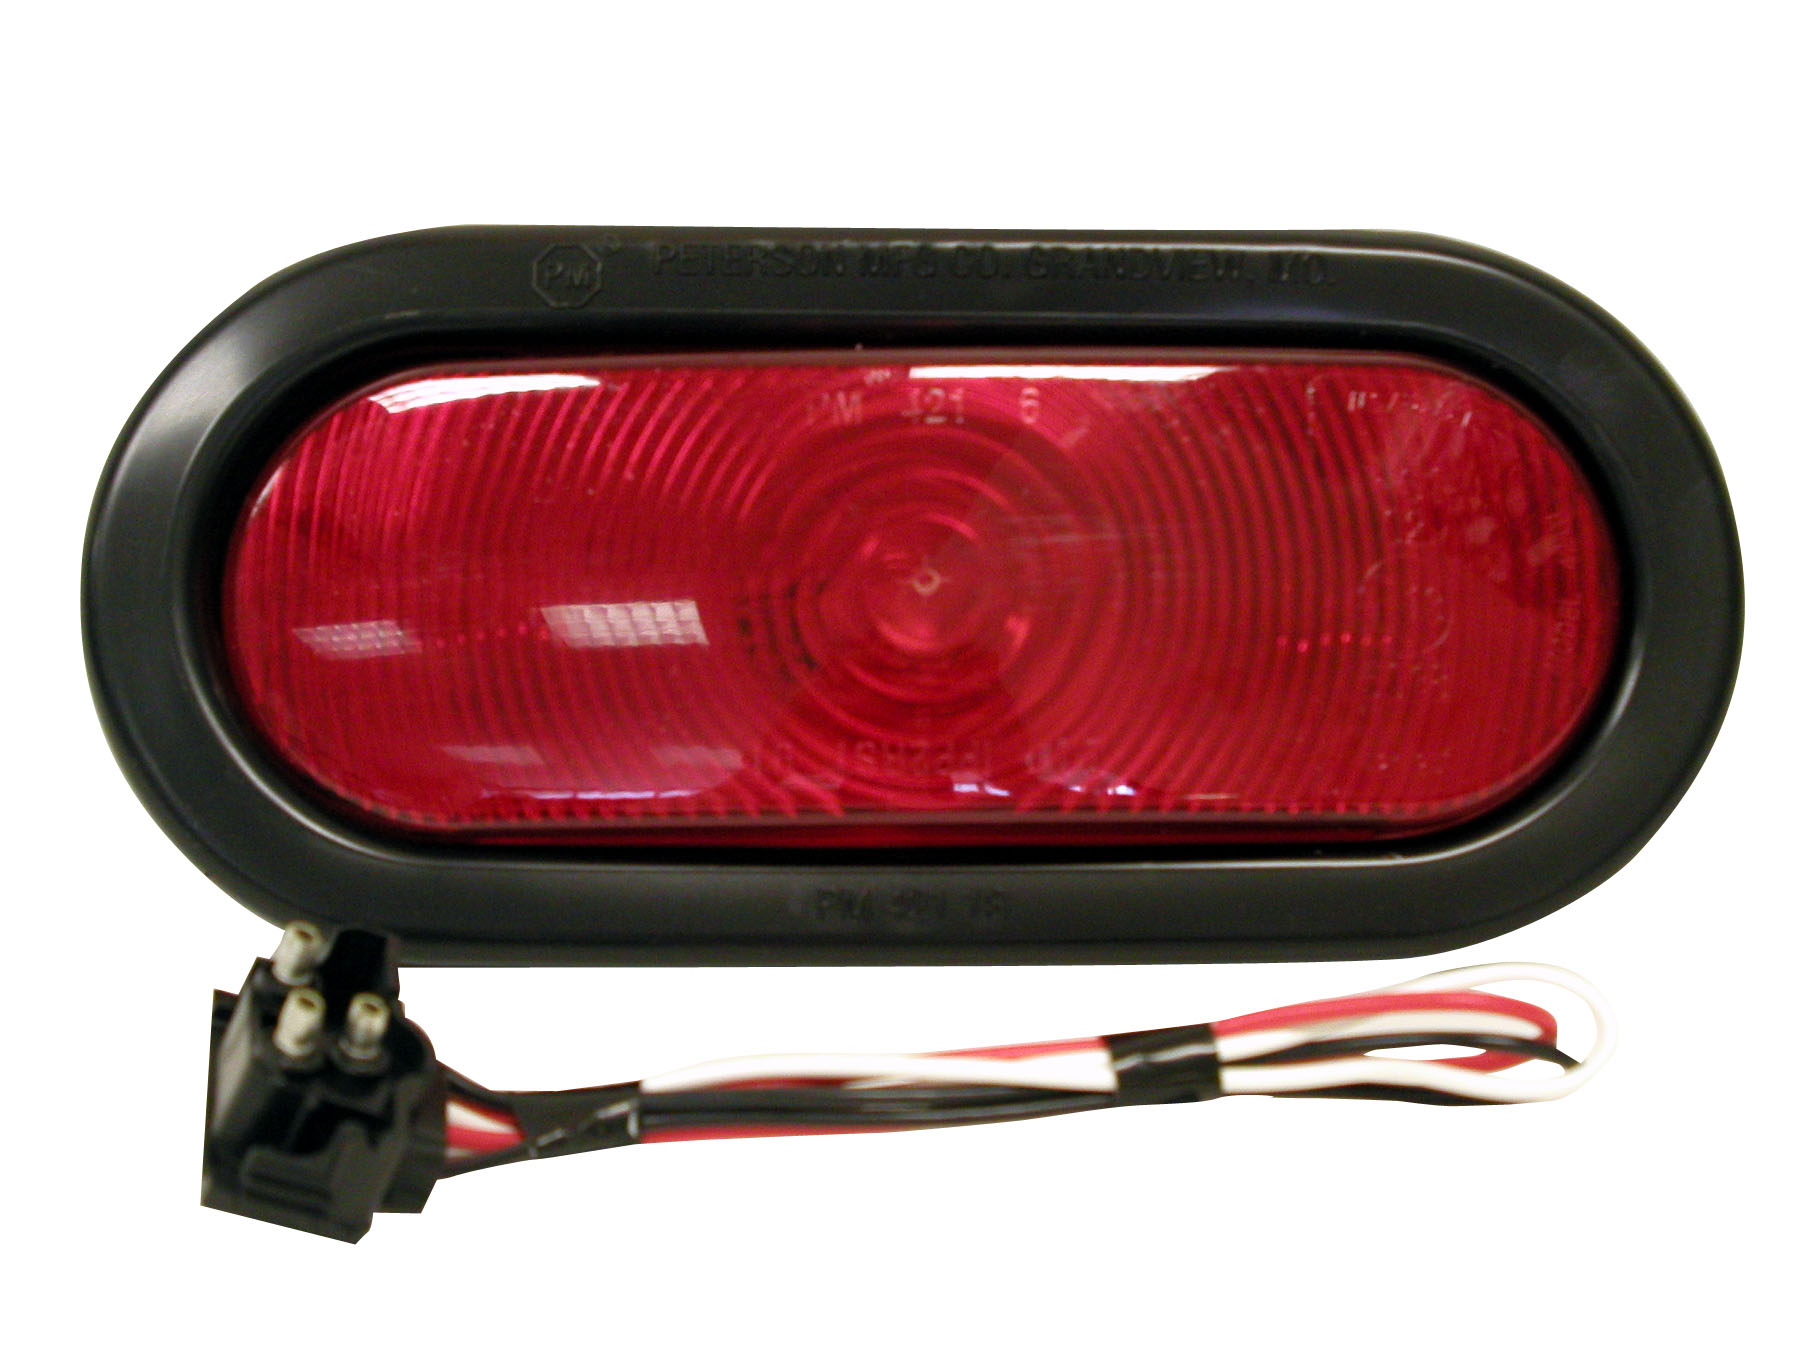 Peterson 421R Red 6.5-Inch Oval Stop Turn and Tail Light Peterson Manufacturing 